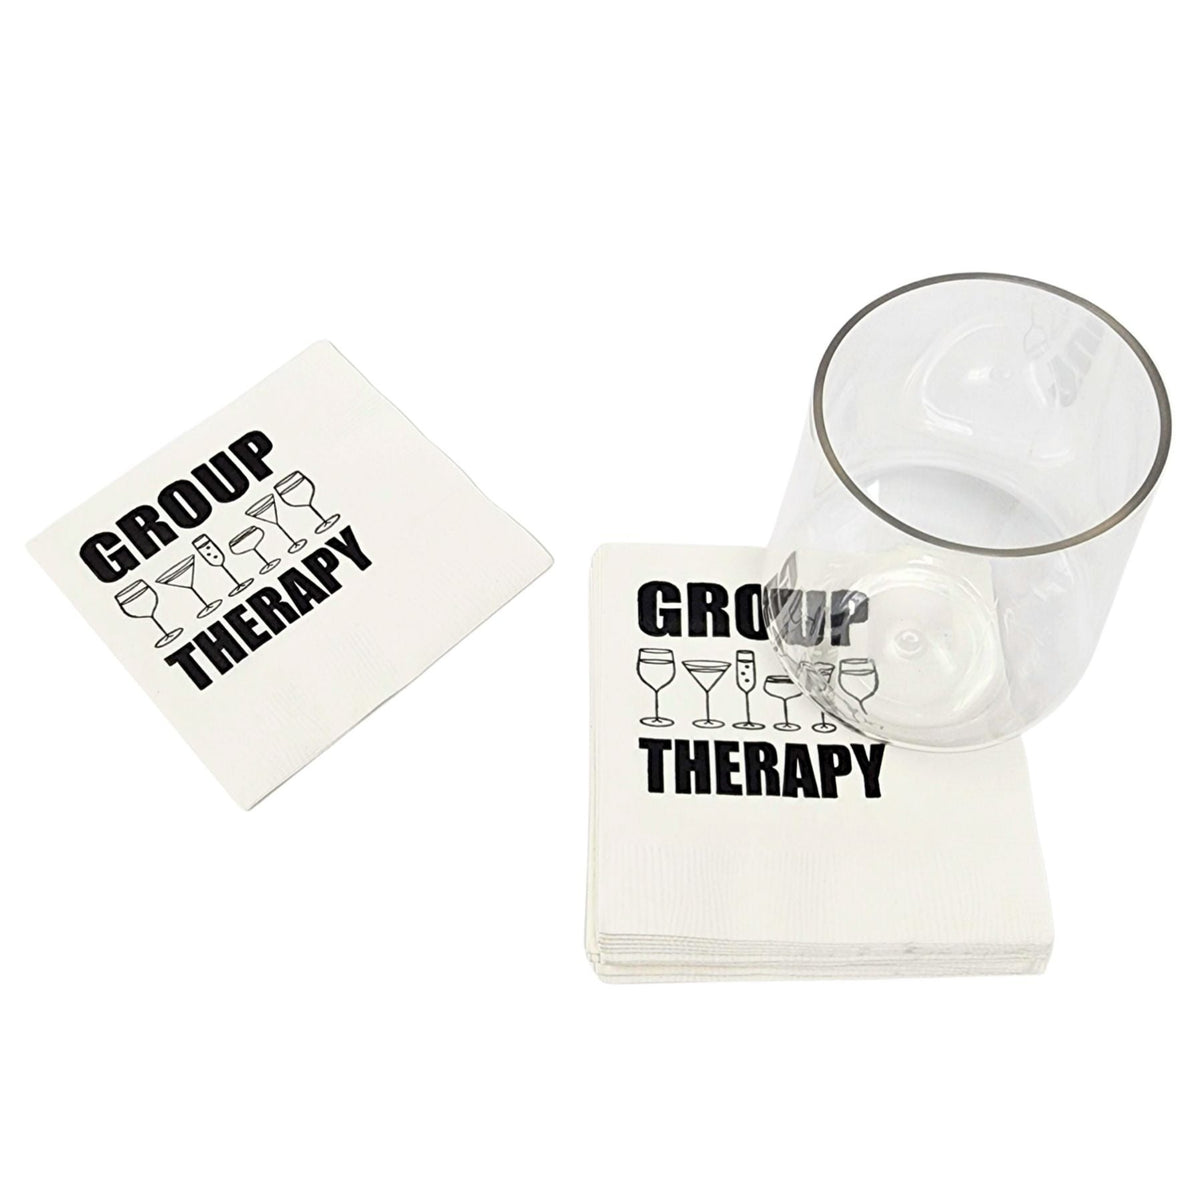 Paper cocktail napkins with the words "group therapy" with drawings of various glasses on top. 